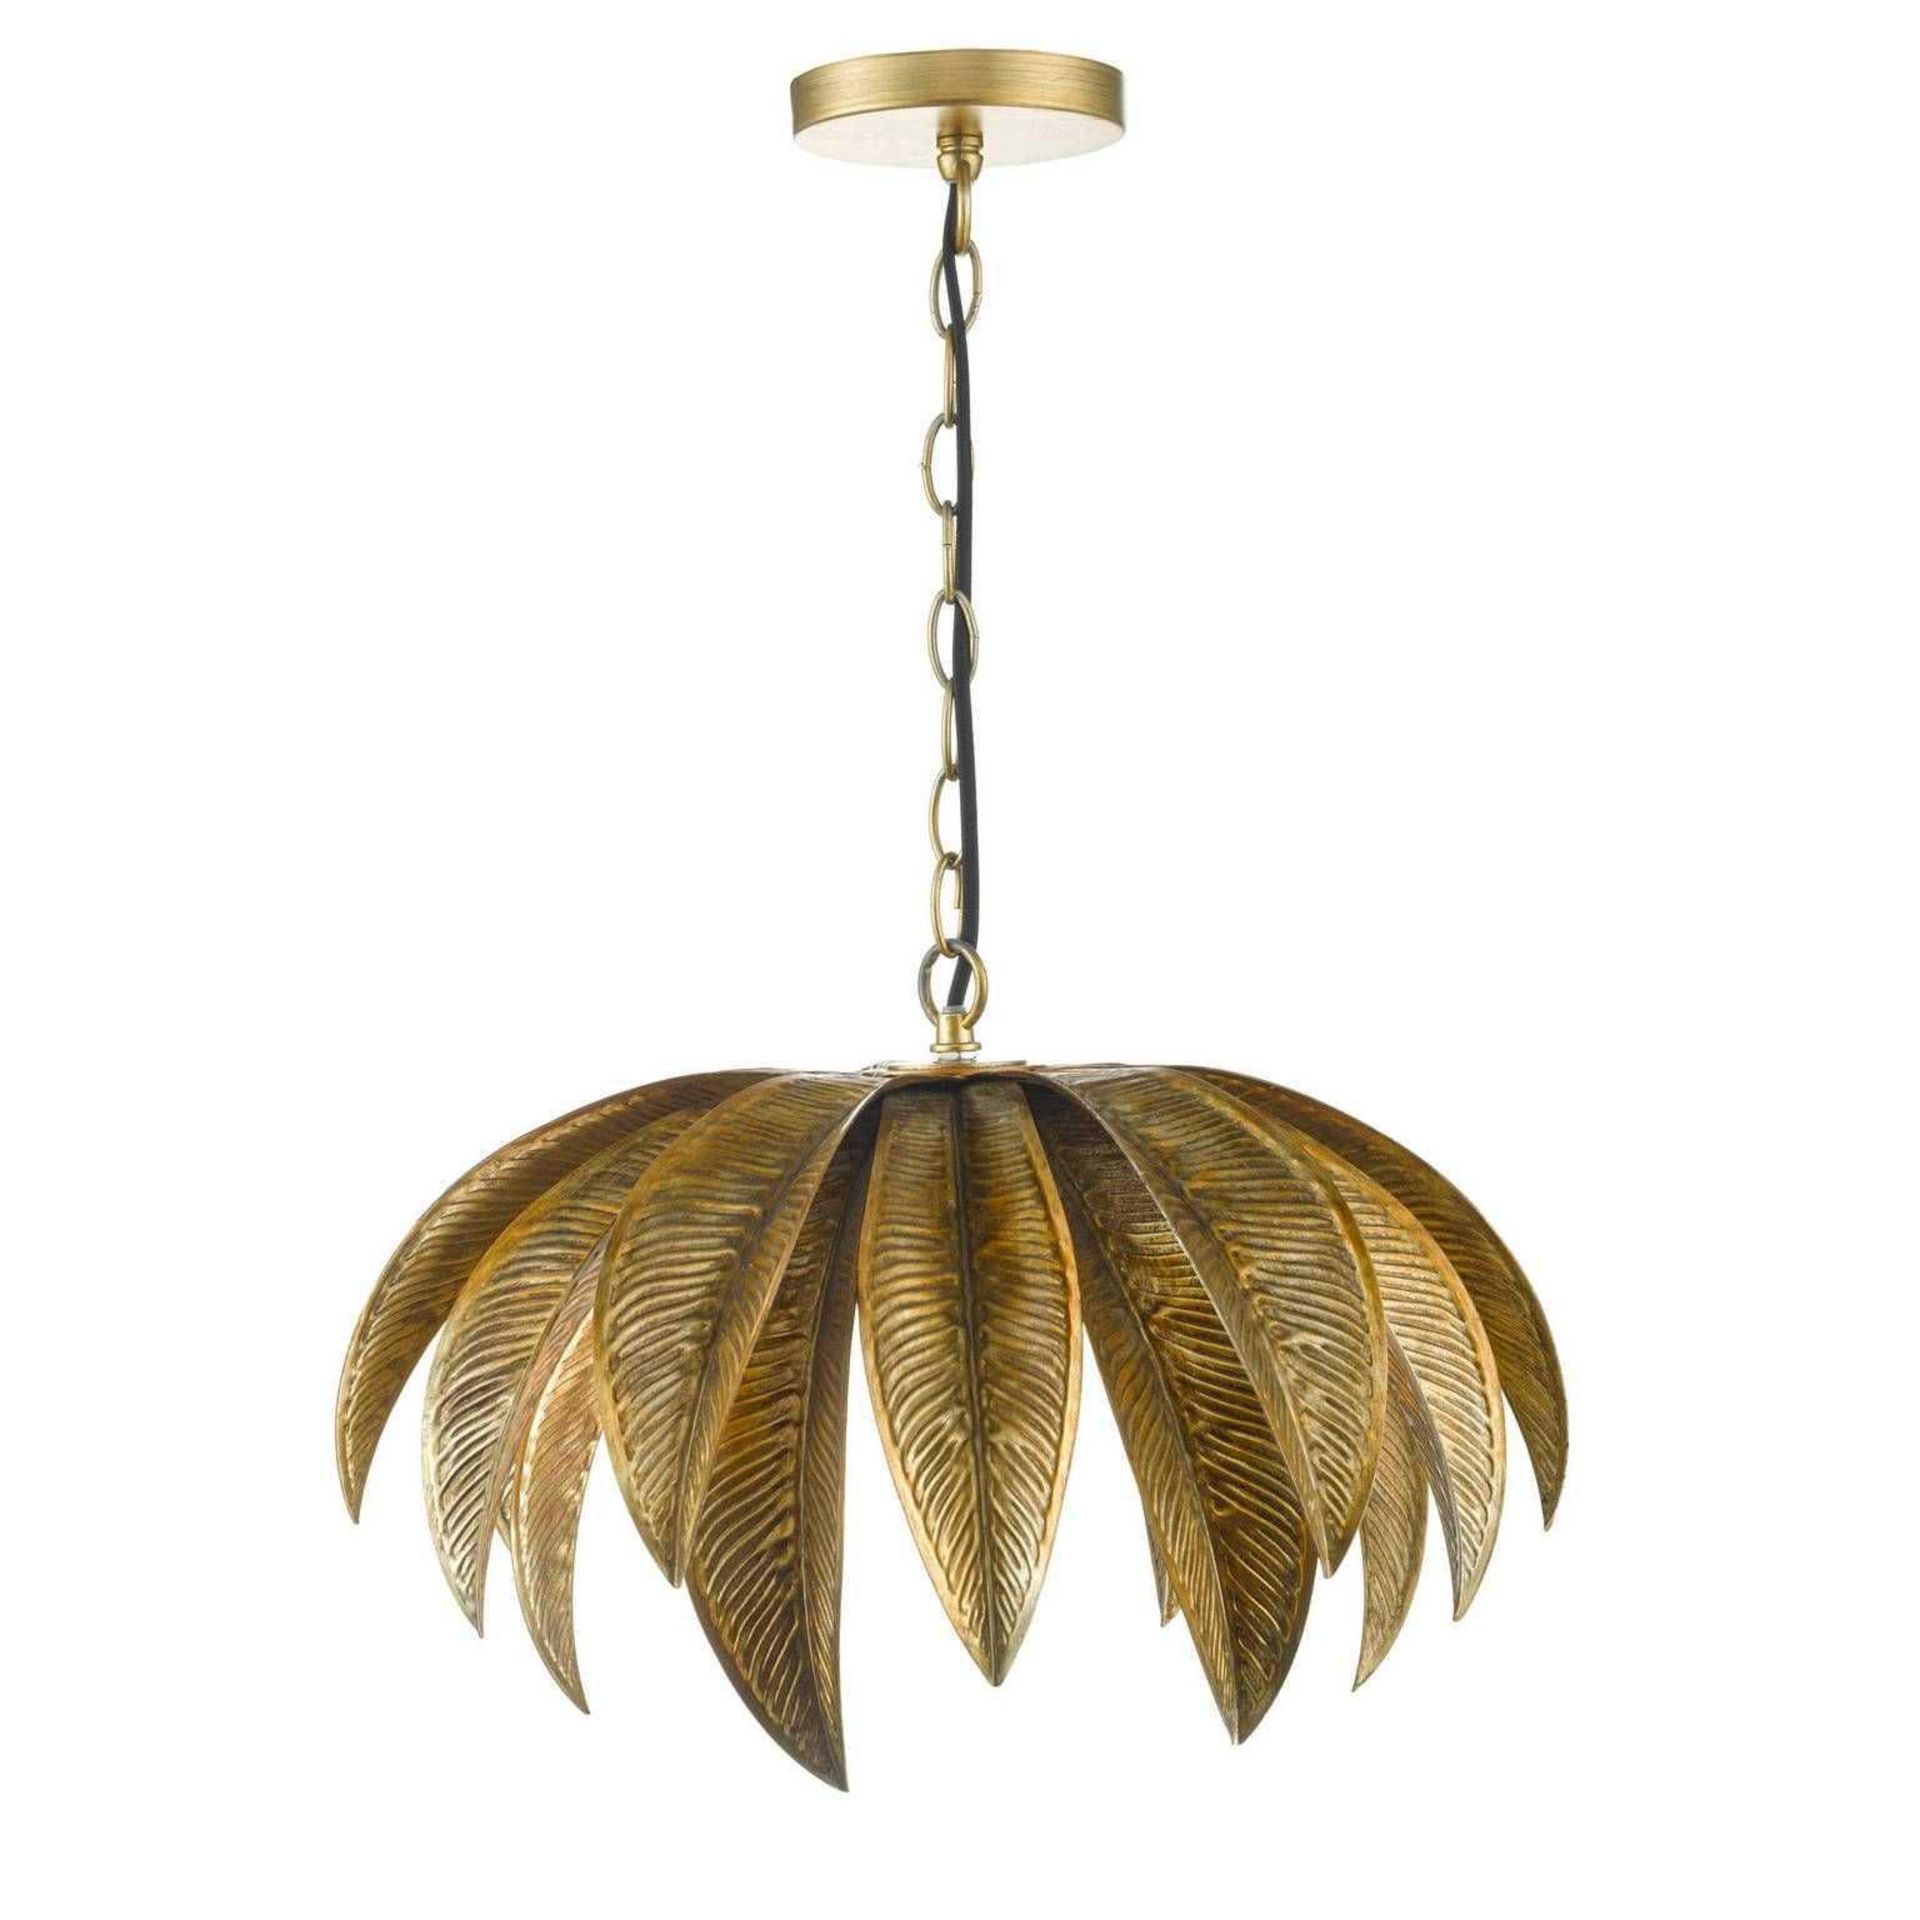 RRP £150 Boxed Cara Suspended Pendant Ceiling Light With Leaf Design By Matthew Williamson (Untested - Image 2 of 2